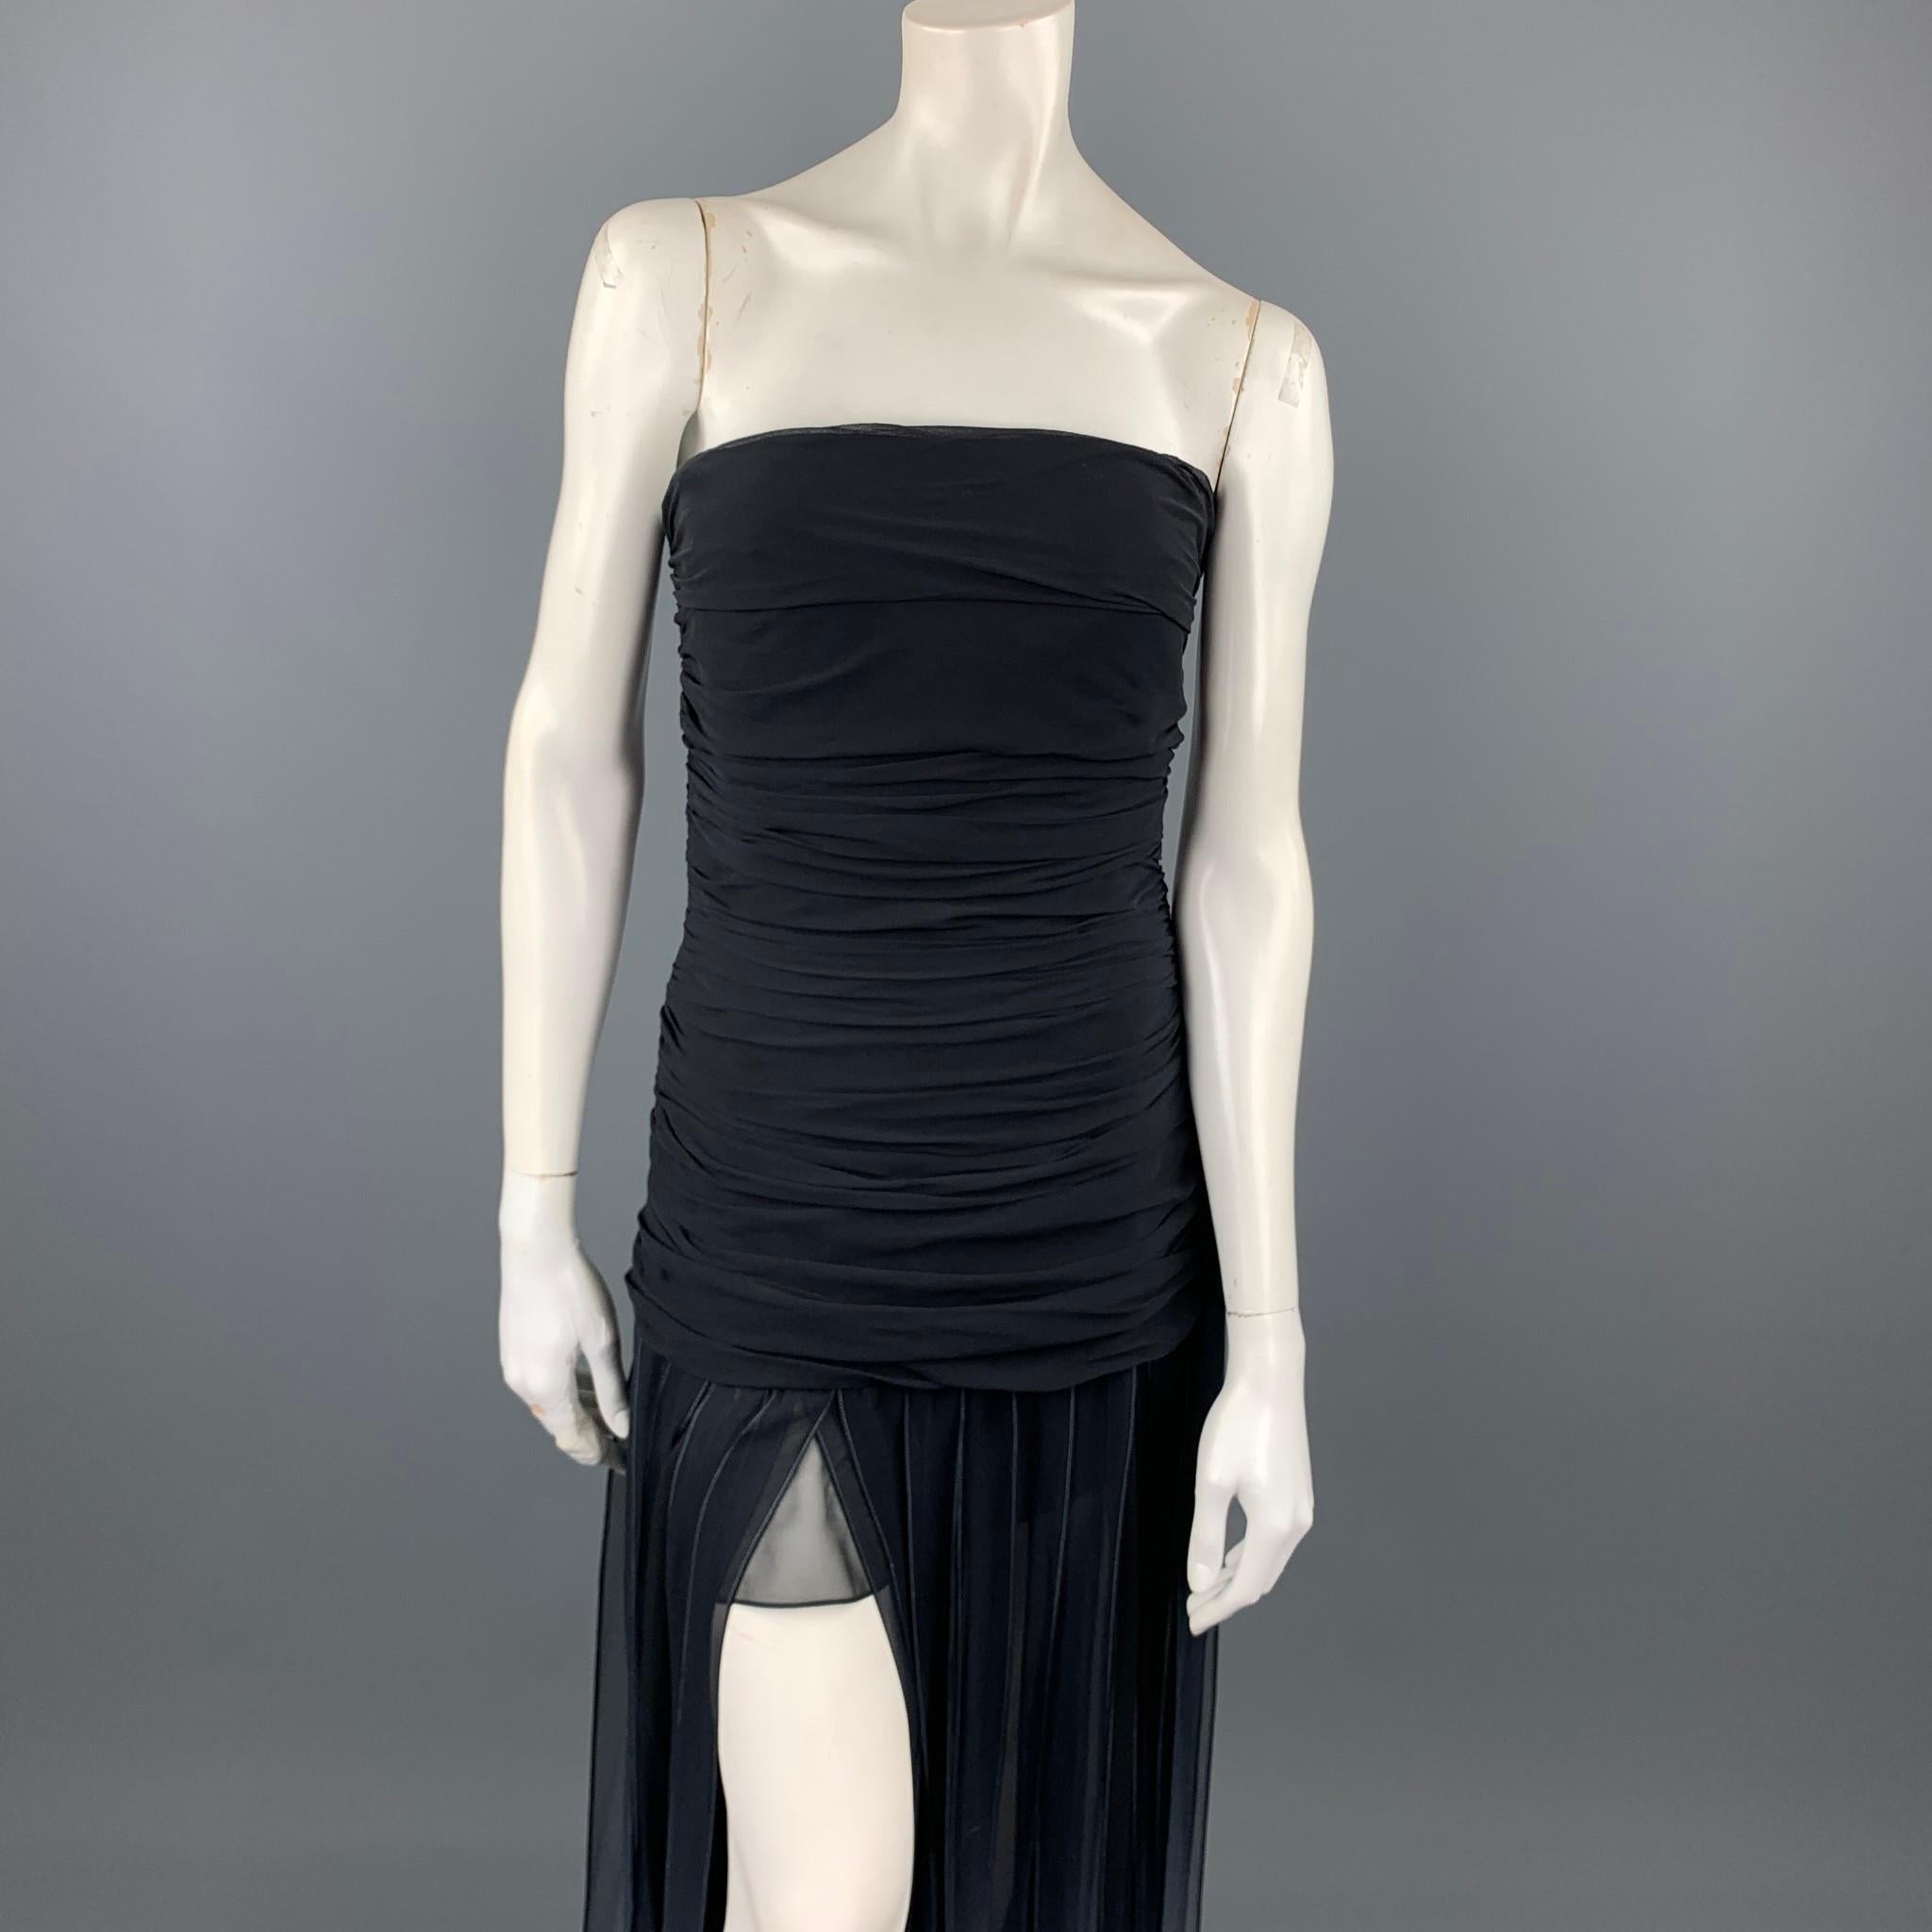 BCBGMAXAZRIA cocktail dress comes in a black ombre chiffon silk featuring a ruched bodice style, tiers skirt, strapless, and a back zip up closure.

Very Good Pre-Owned Condition.
Marked: 6

Measurements:

Bust: 26 in. 
Waist: 28 in.
Hip: 38 in.